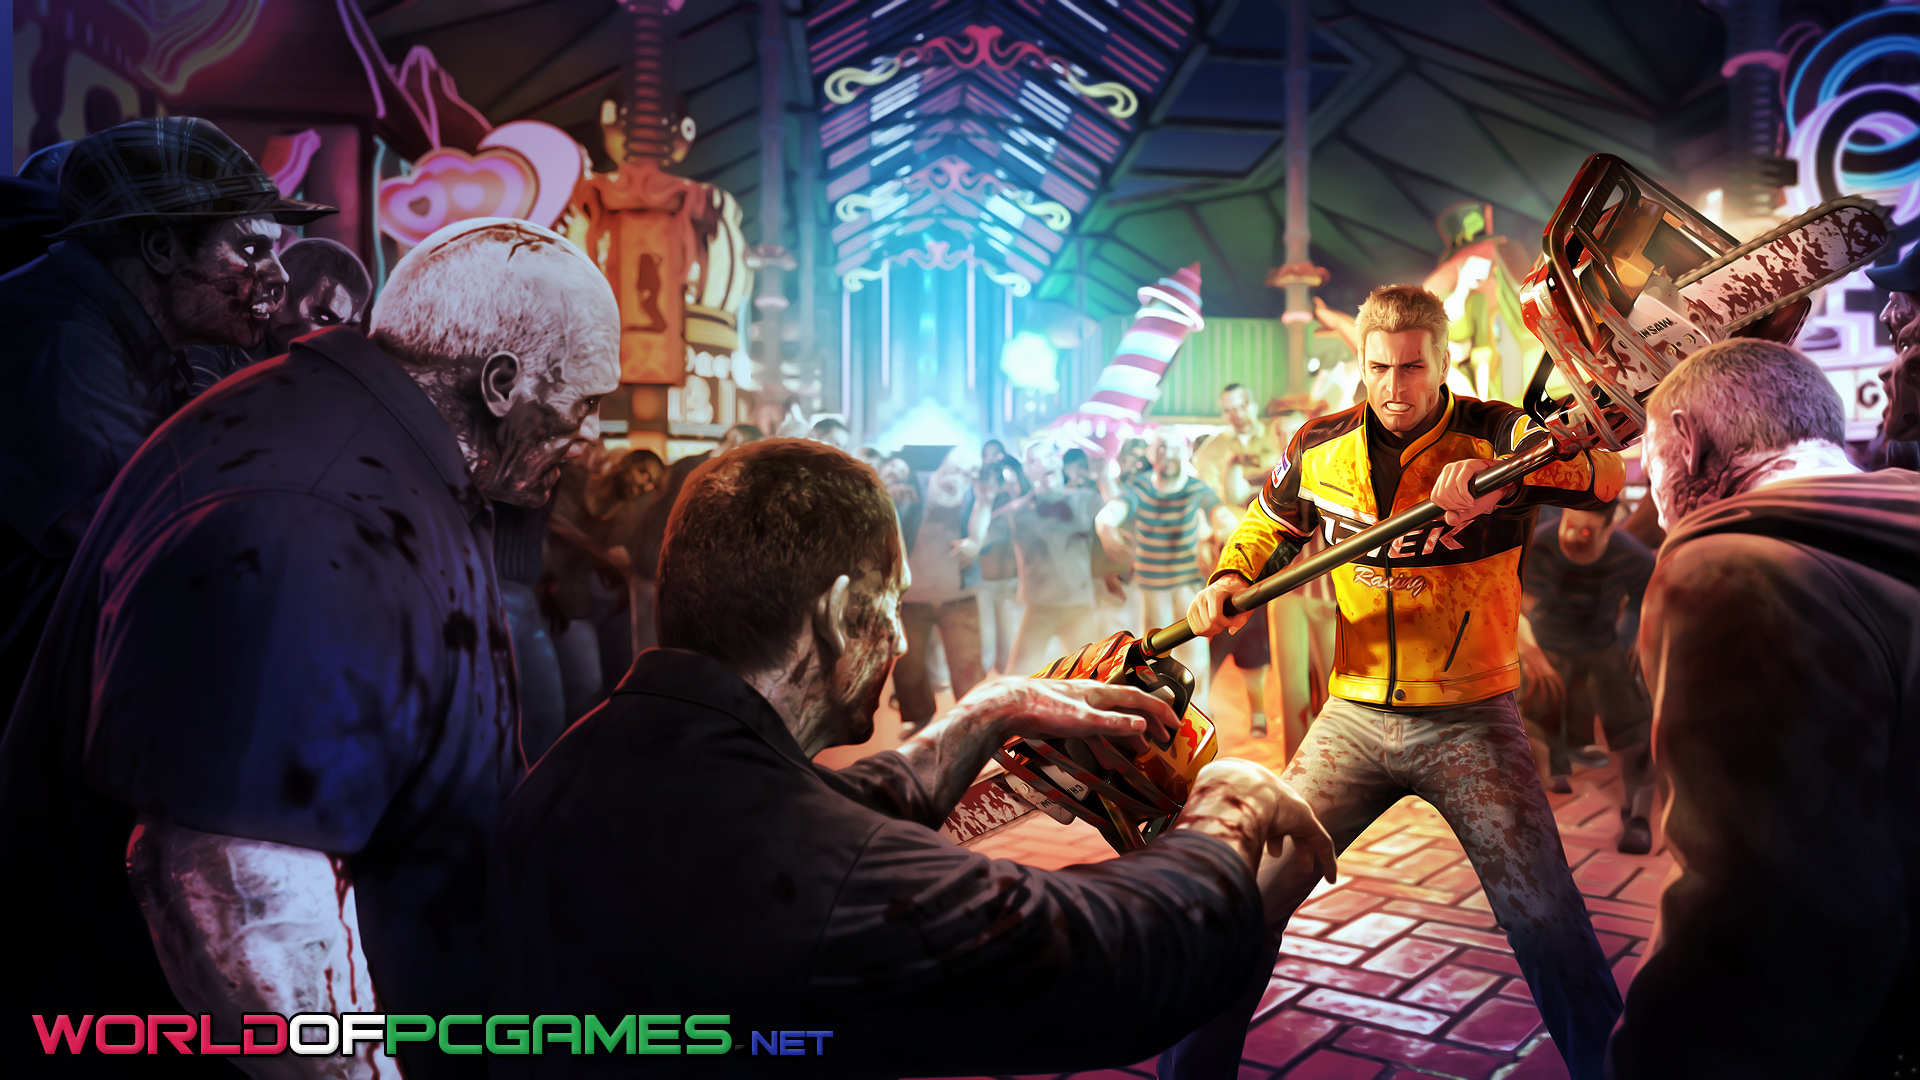 Dead Rising 2 Free Download By worldof-pcgames.net